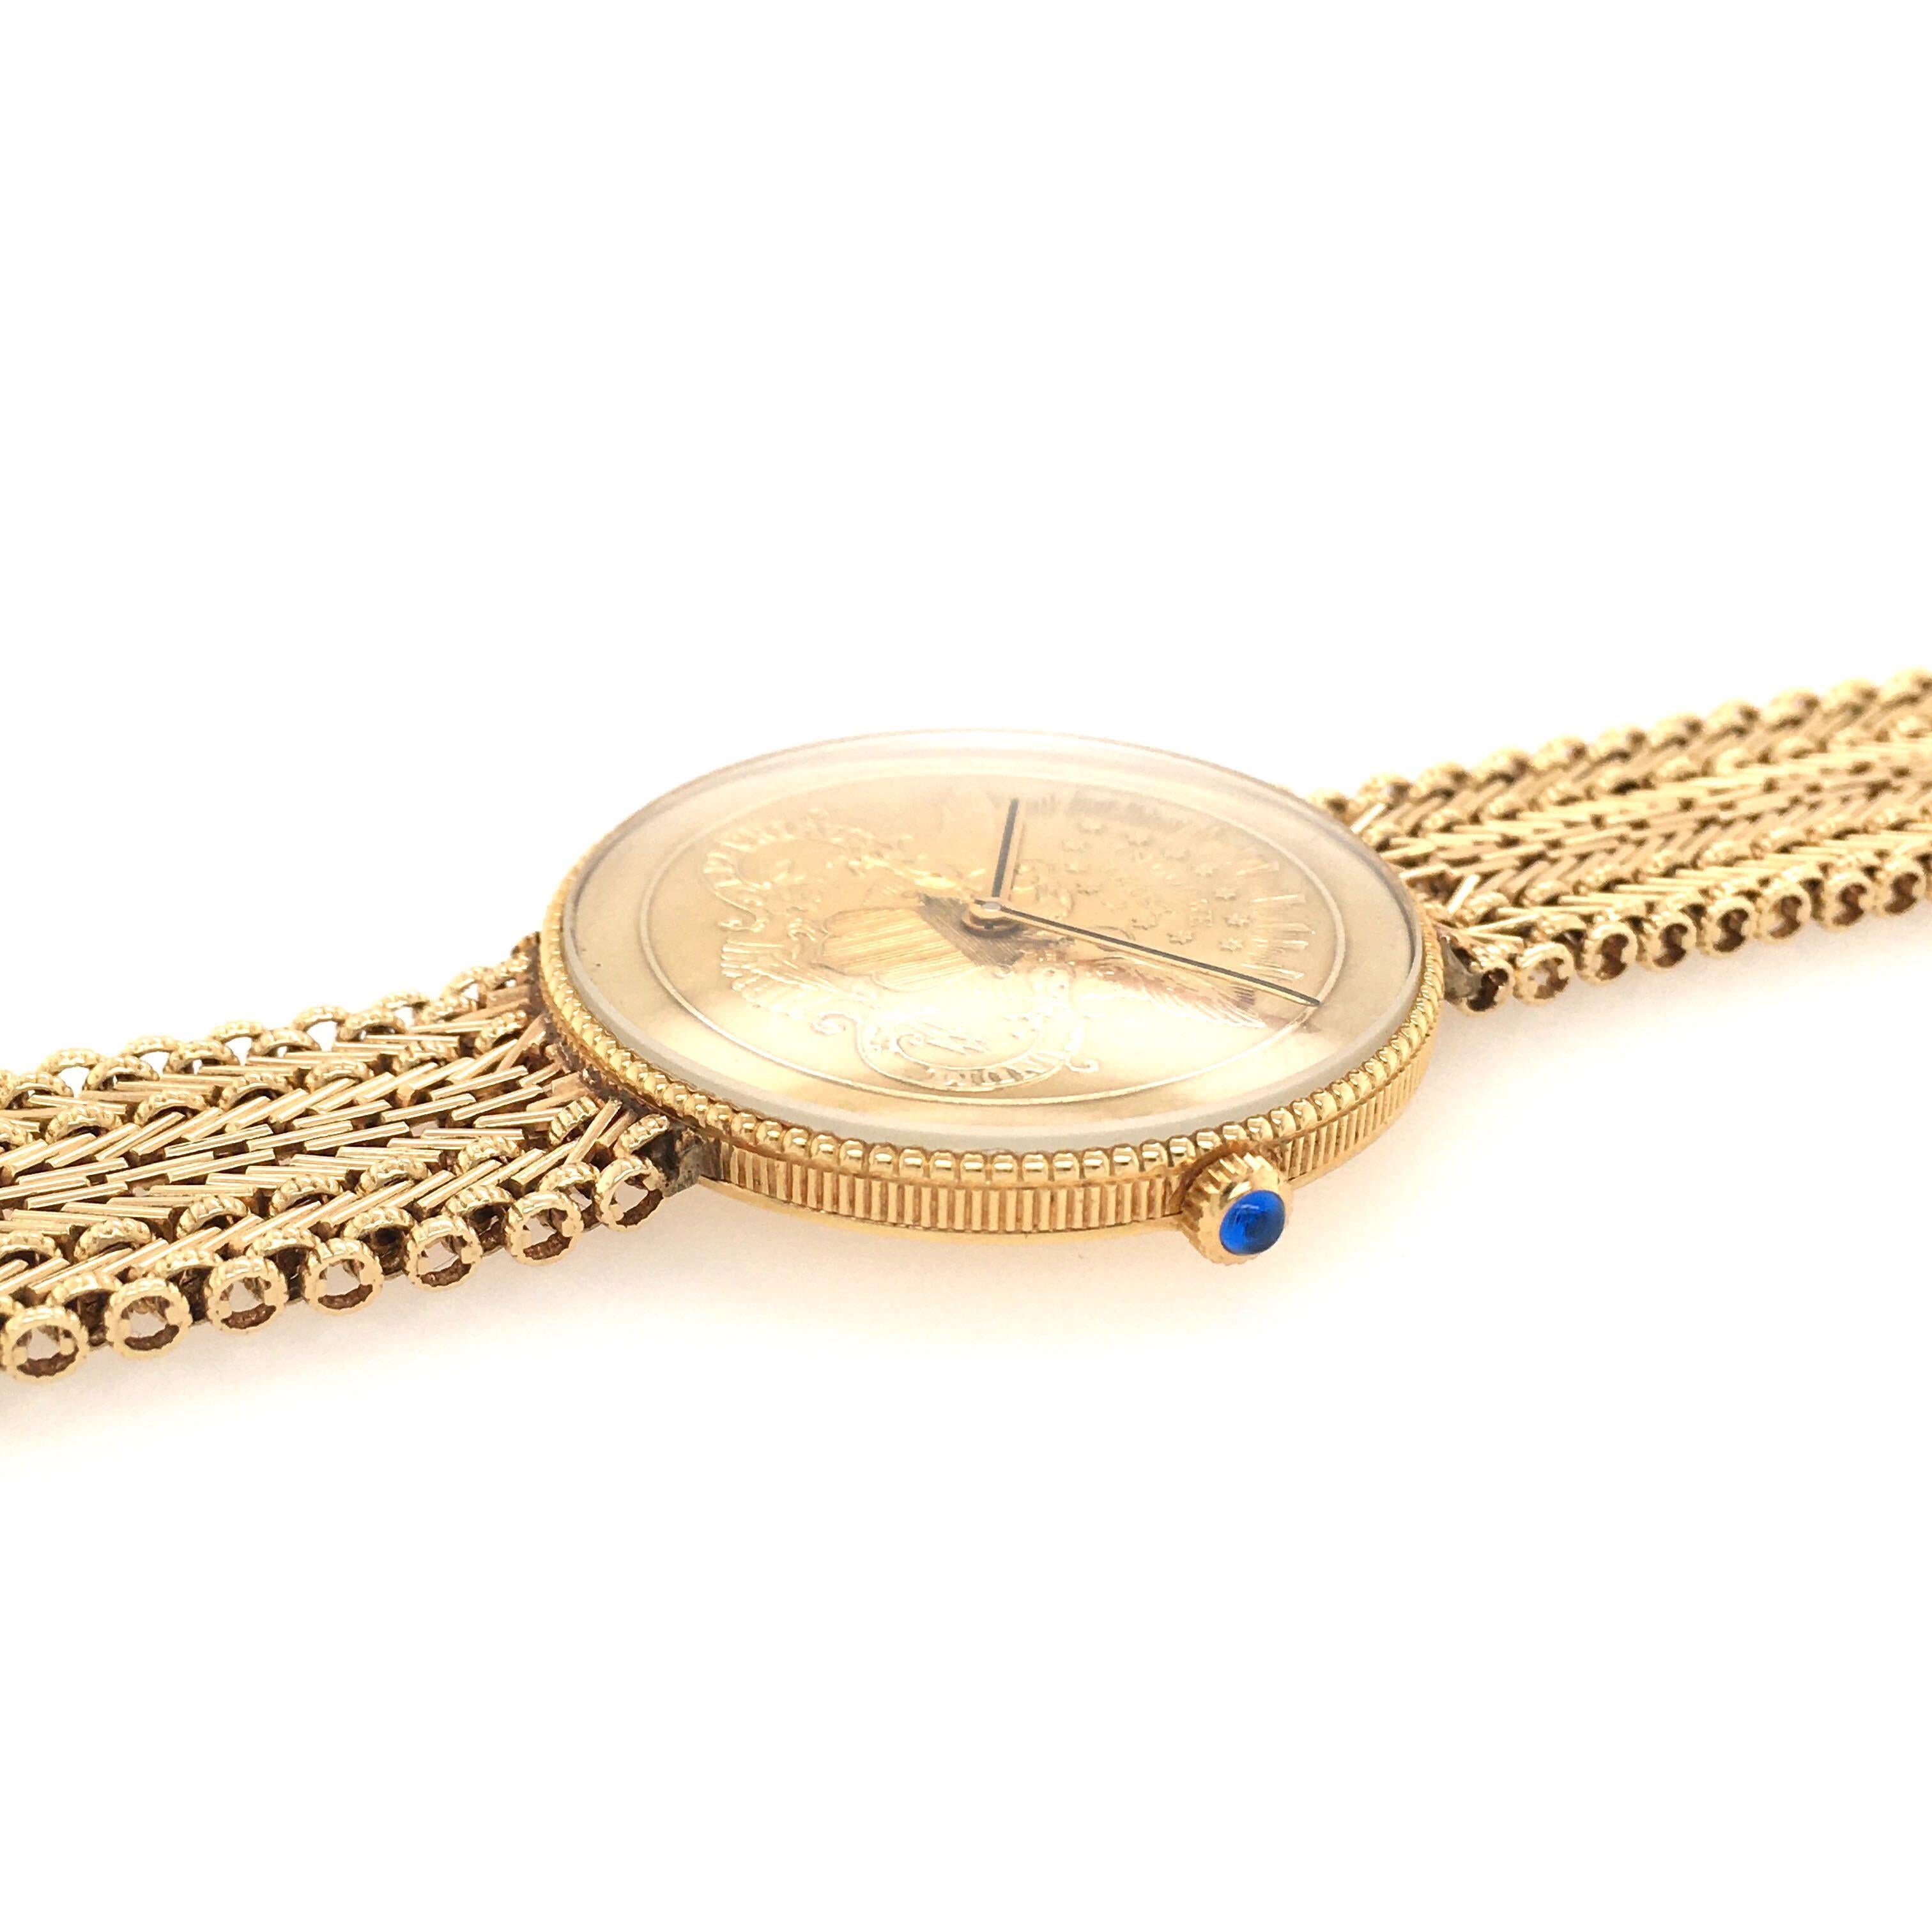 An 18 karat yellow gold watch with 22K karat gold US coin dial a 14 karat yellow gold bracelet.  Of mechanical movement. 32mm, with textured gold bezel and blued stone set crown. Length is approximately 7 inches (adjustable), gross weight is